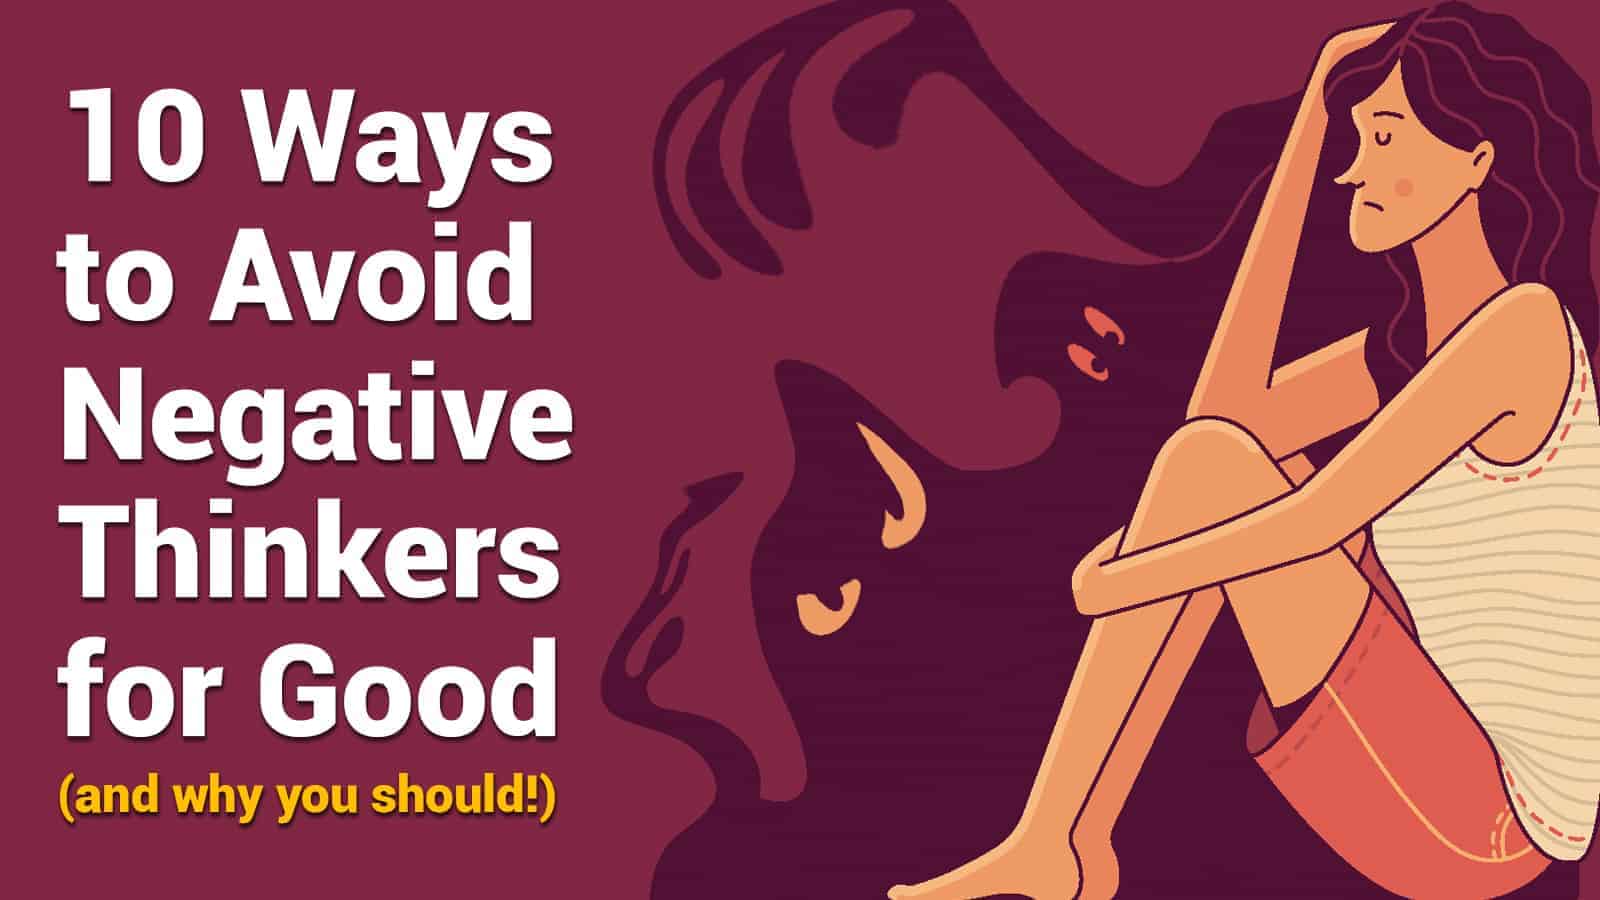 10 Ways to Avoid Negative Thinkers for Good (and why you should!)